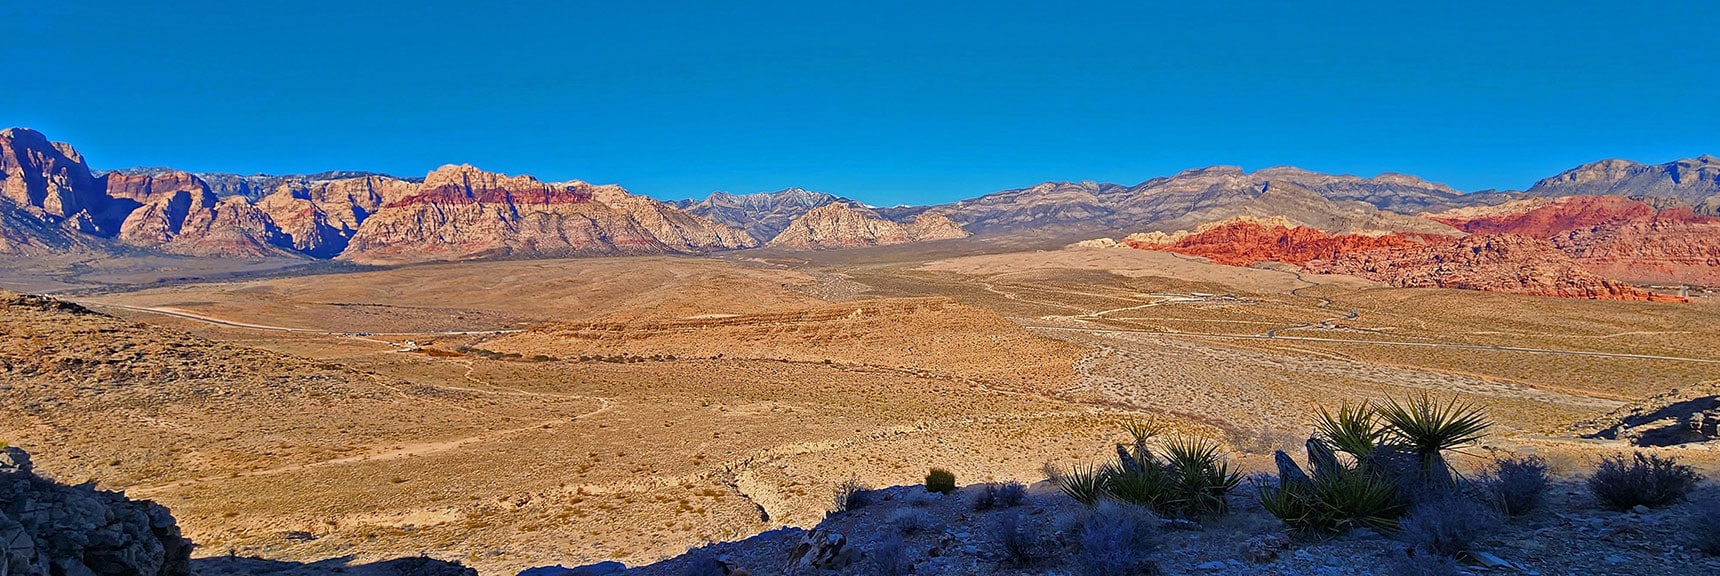 Larger View of Red Rock Canyon. Rainbow Mts. Keystone Thrust Cliffs, Calico Hills | Eastern Outer Circuit | Blue Diamond Hill | Red Rock Canyon, Nevada